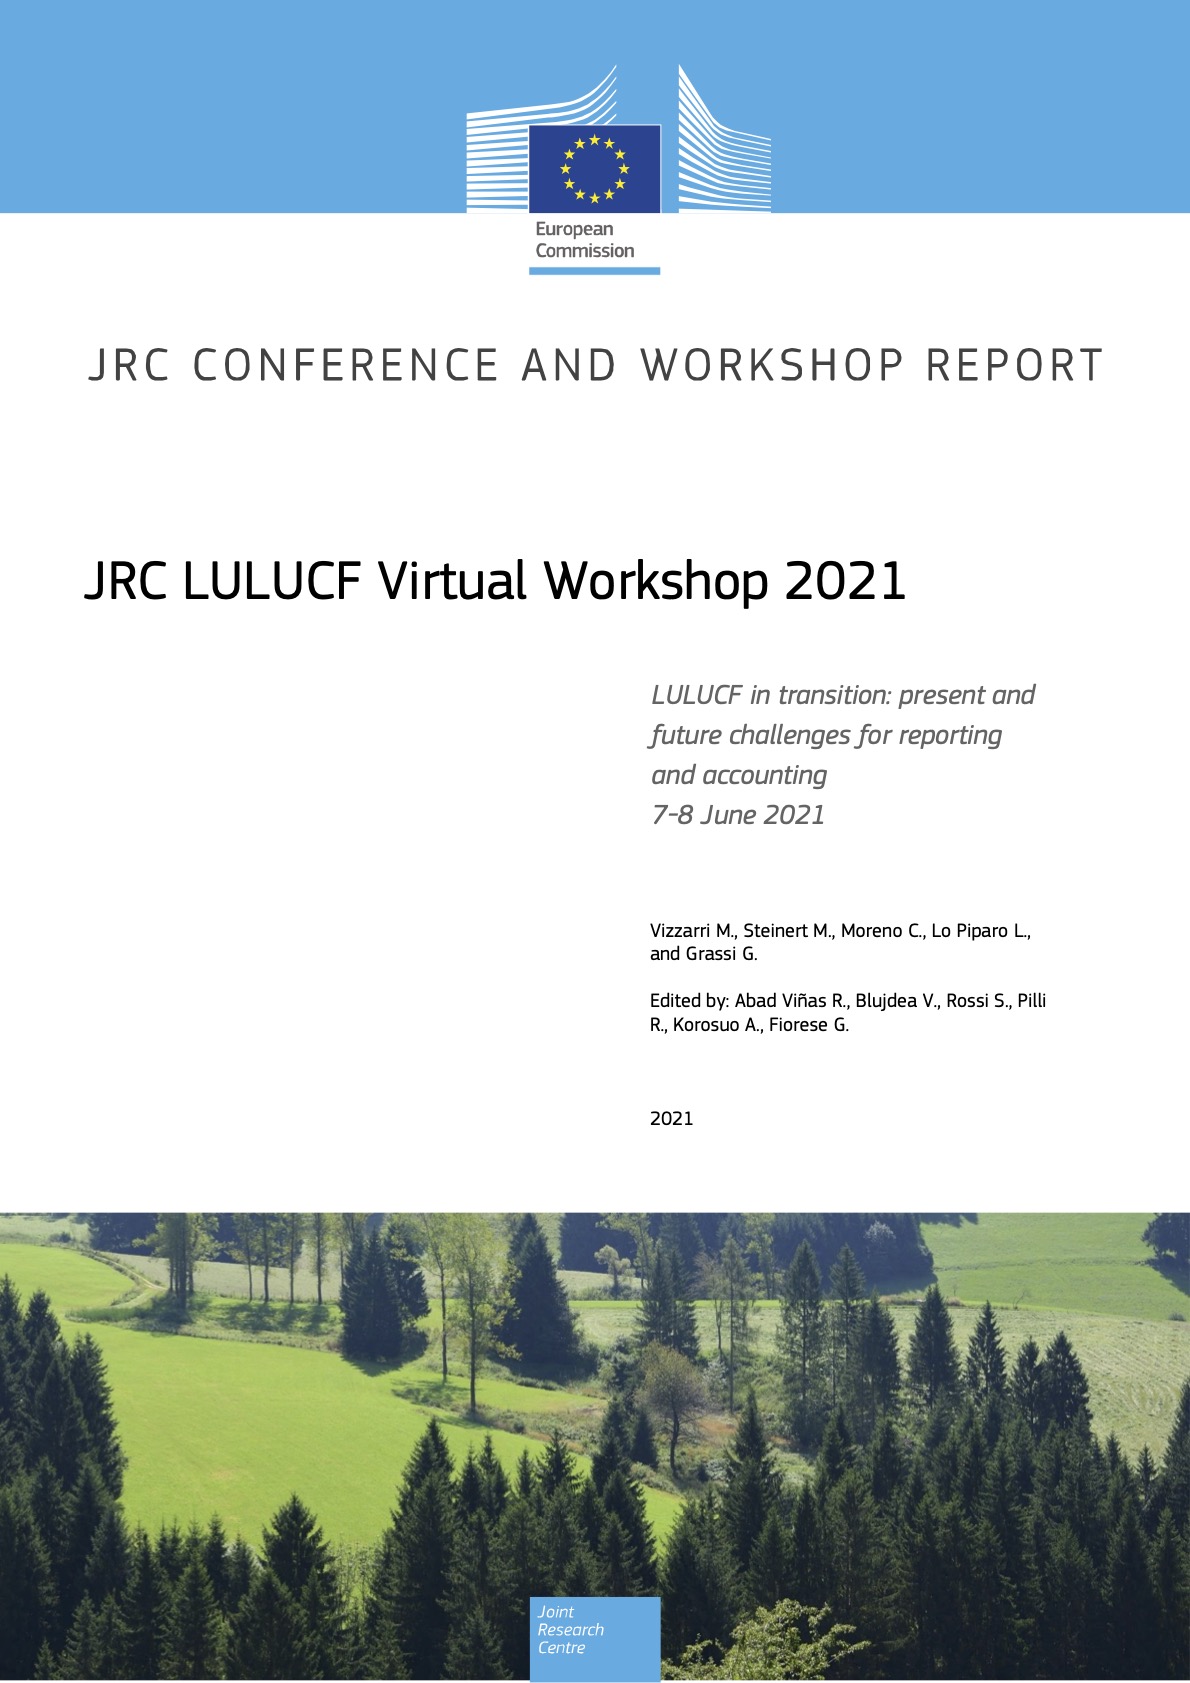 Technical support for LULUCF virtual workshop 2021